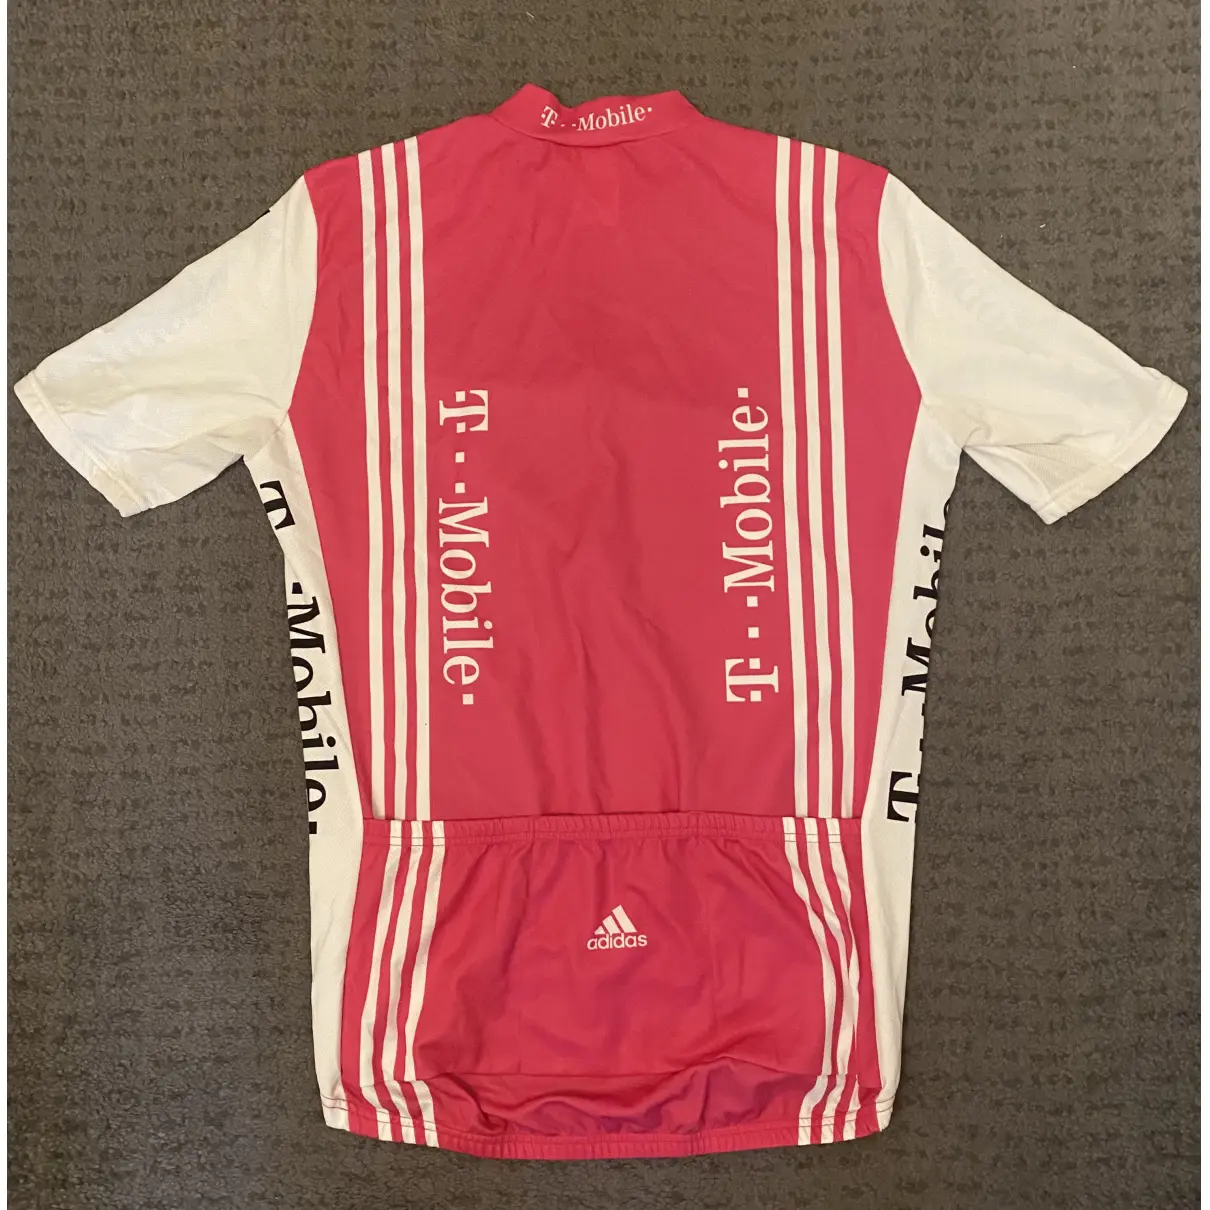 Buy Adidas Pink Polyester T-shirt online